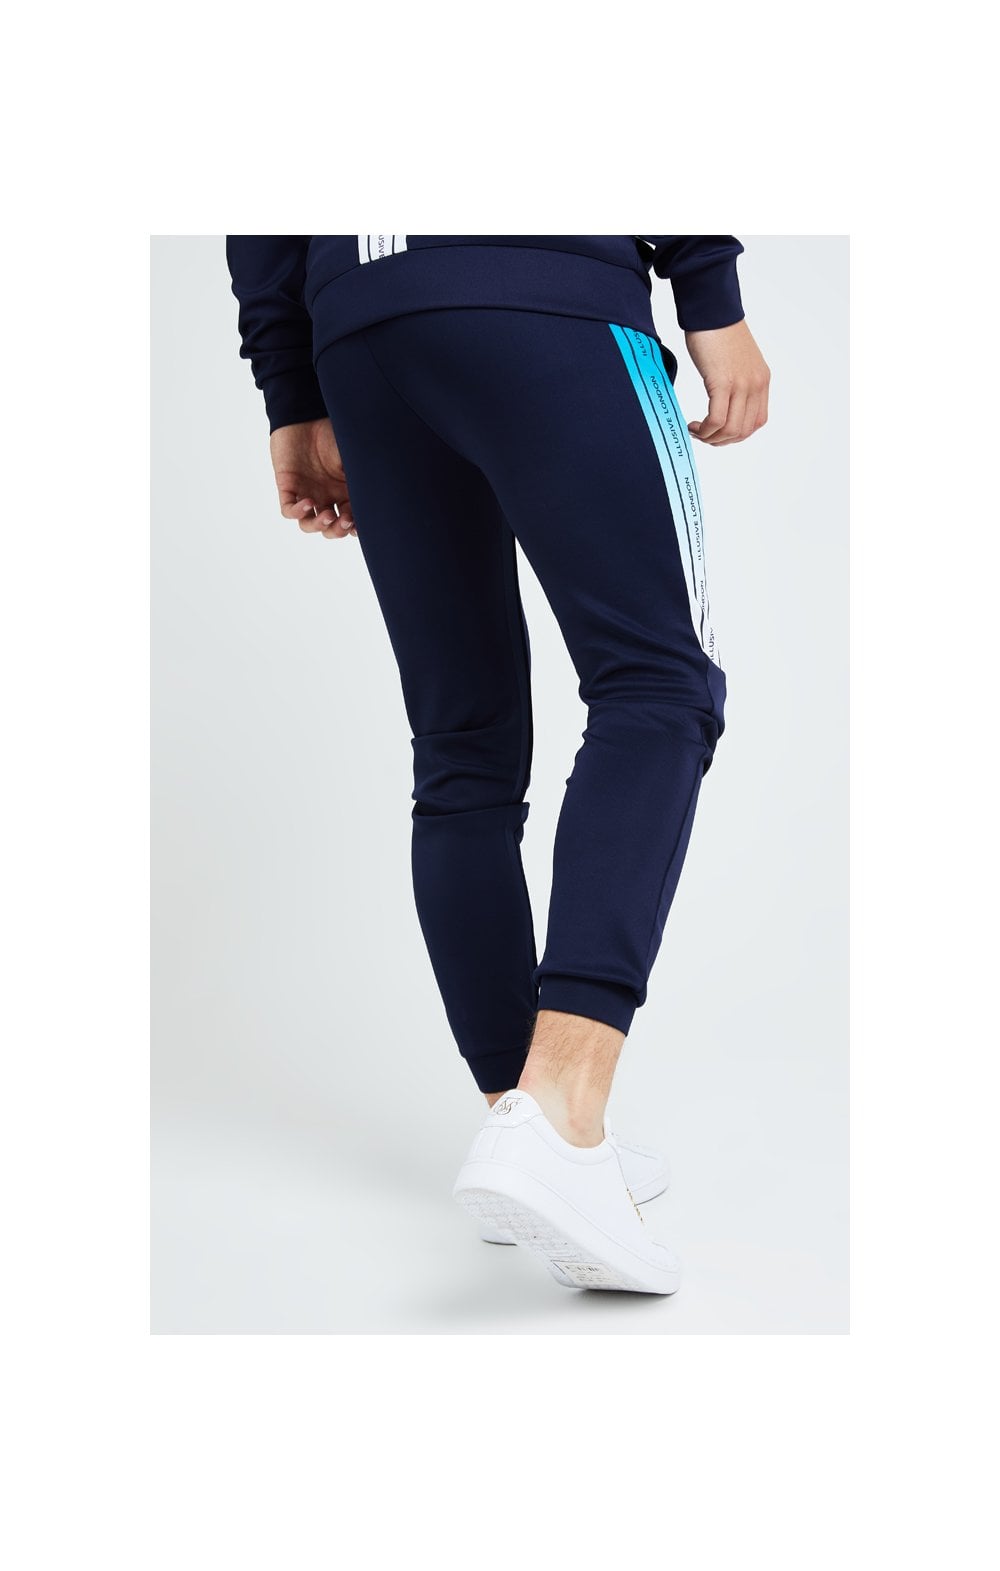 Illusive London Flux Taped Joggers - Navy & Blue (2)